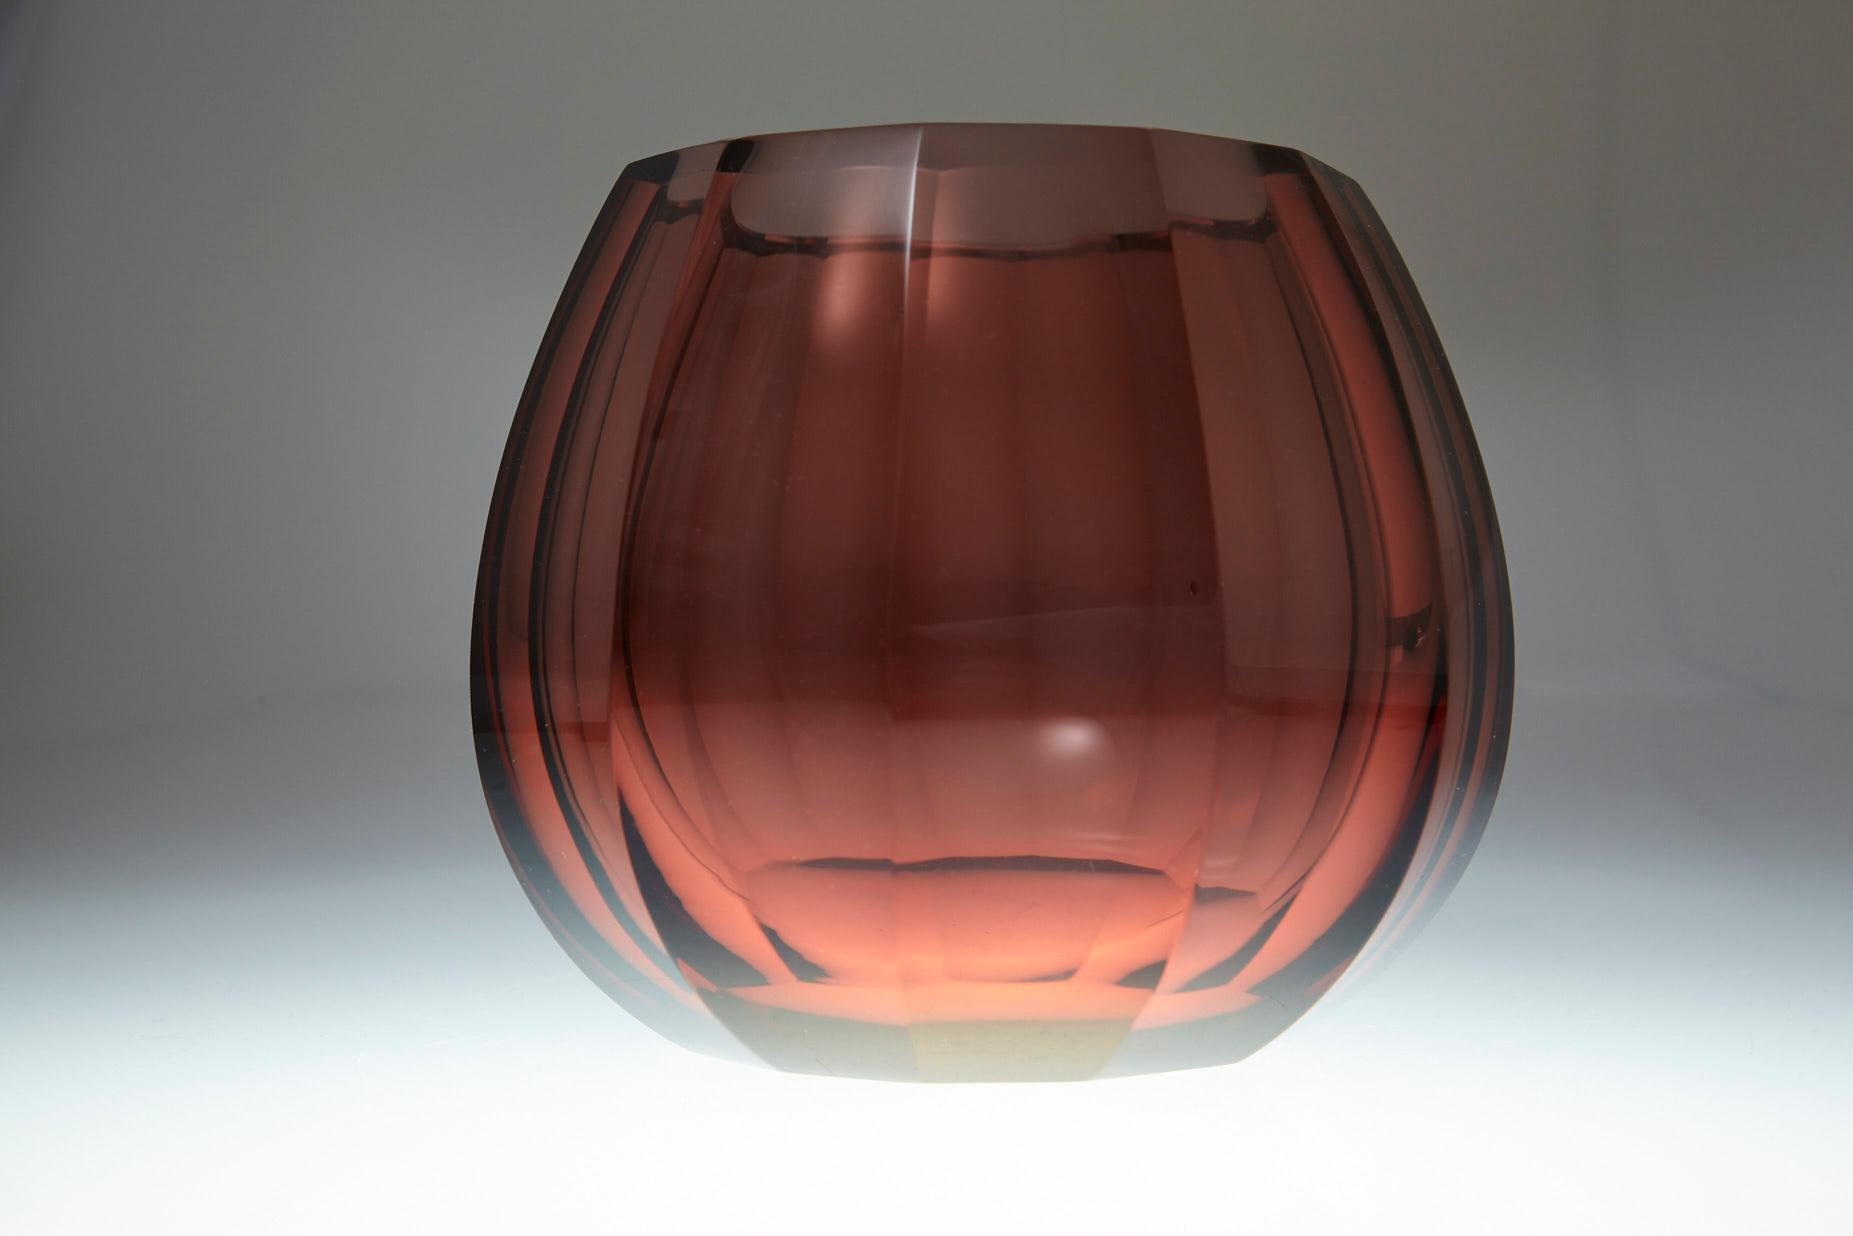 Czech Amber Hand-Cut Crystal Vase Attributed to Josef Hoffmann Signed Moser & Söhne For Sale